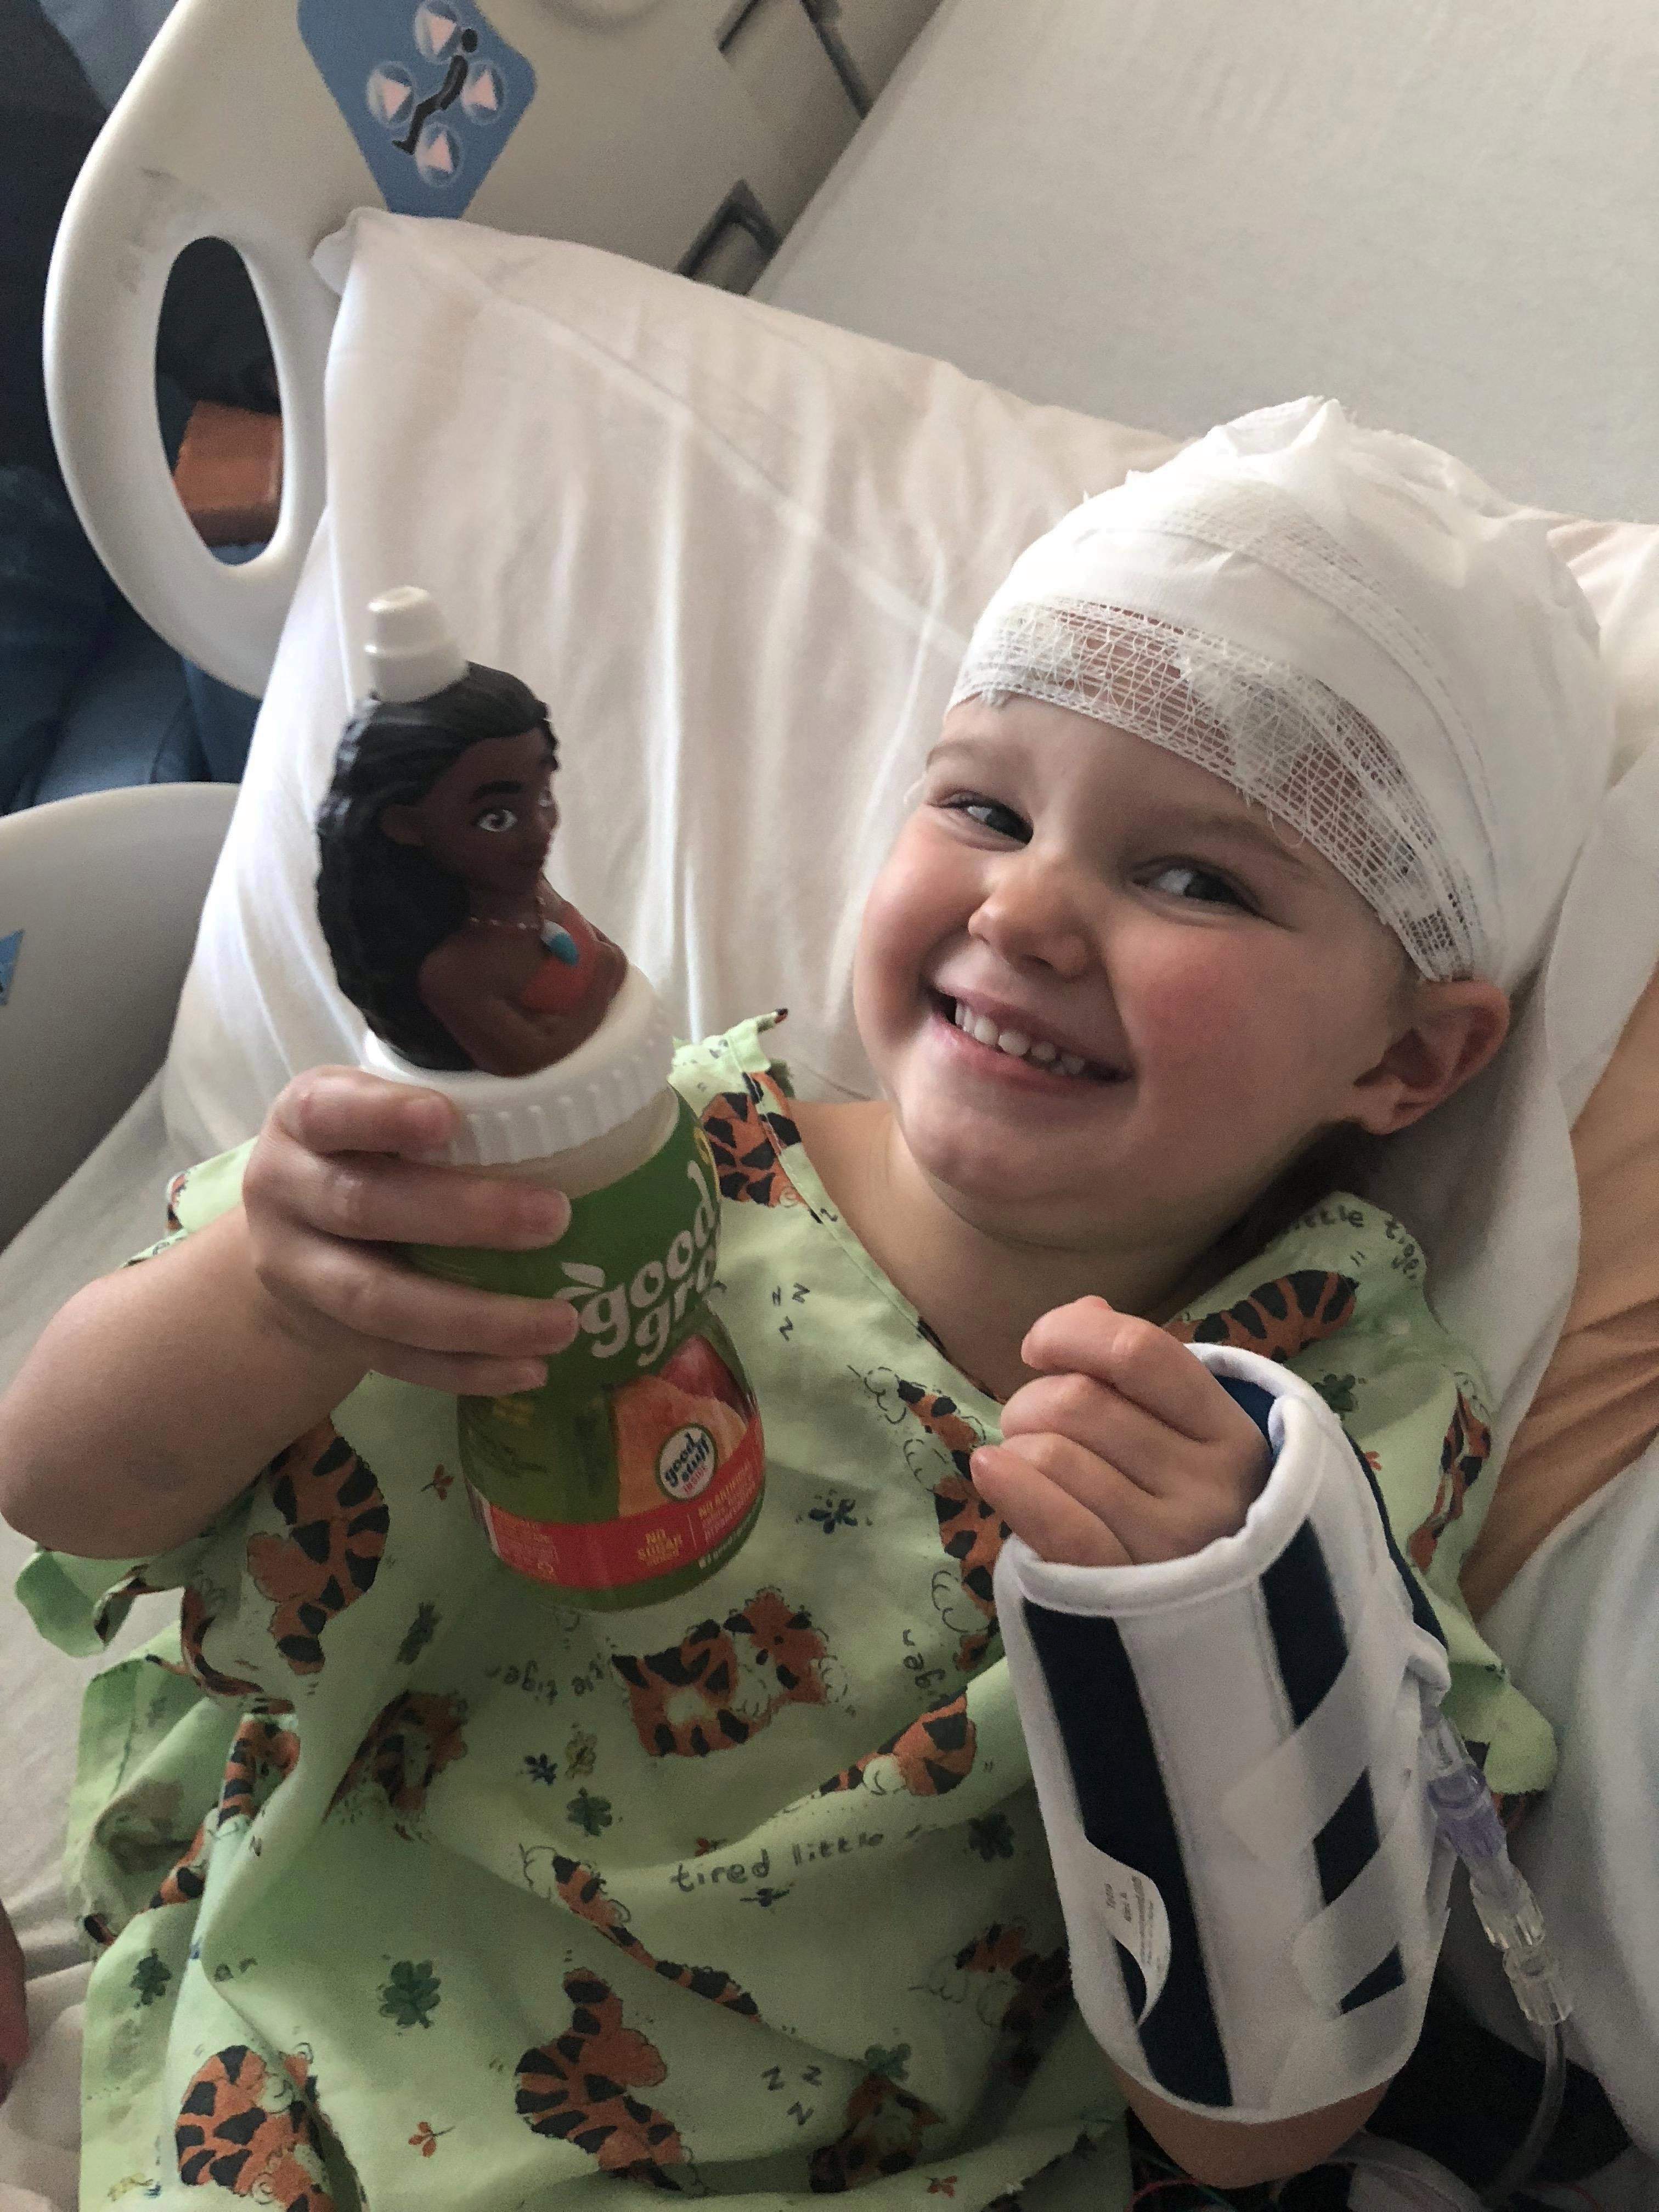  Grace was diagnosed with autoimmune encephalitis, a deadly condition where the immune system attacks the brain and makes it swell